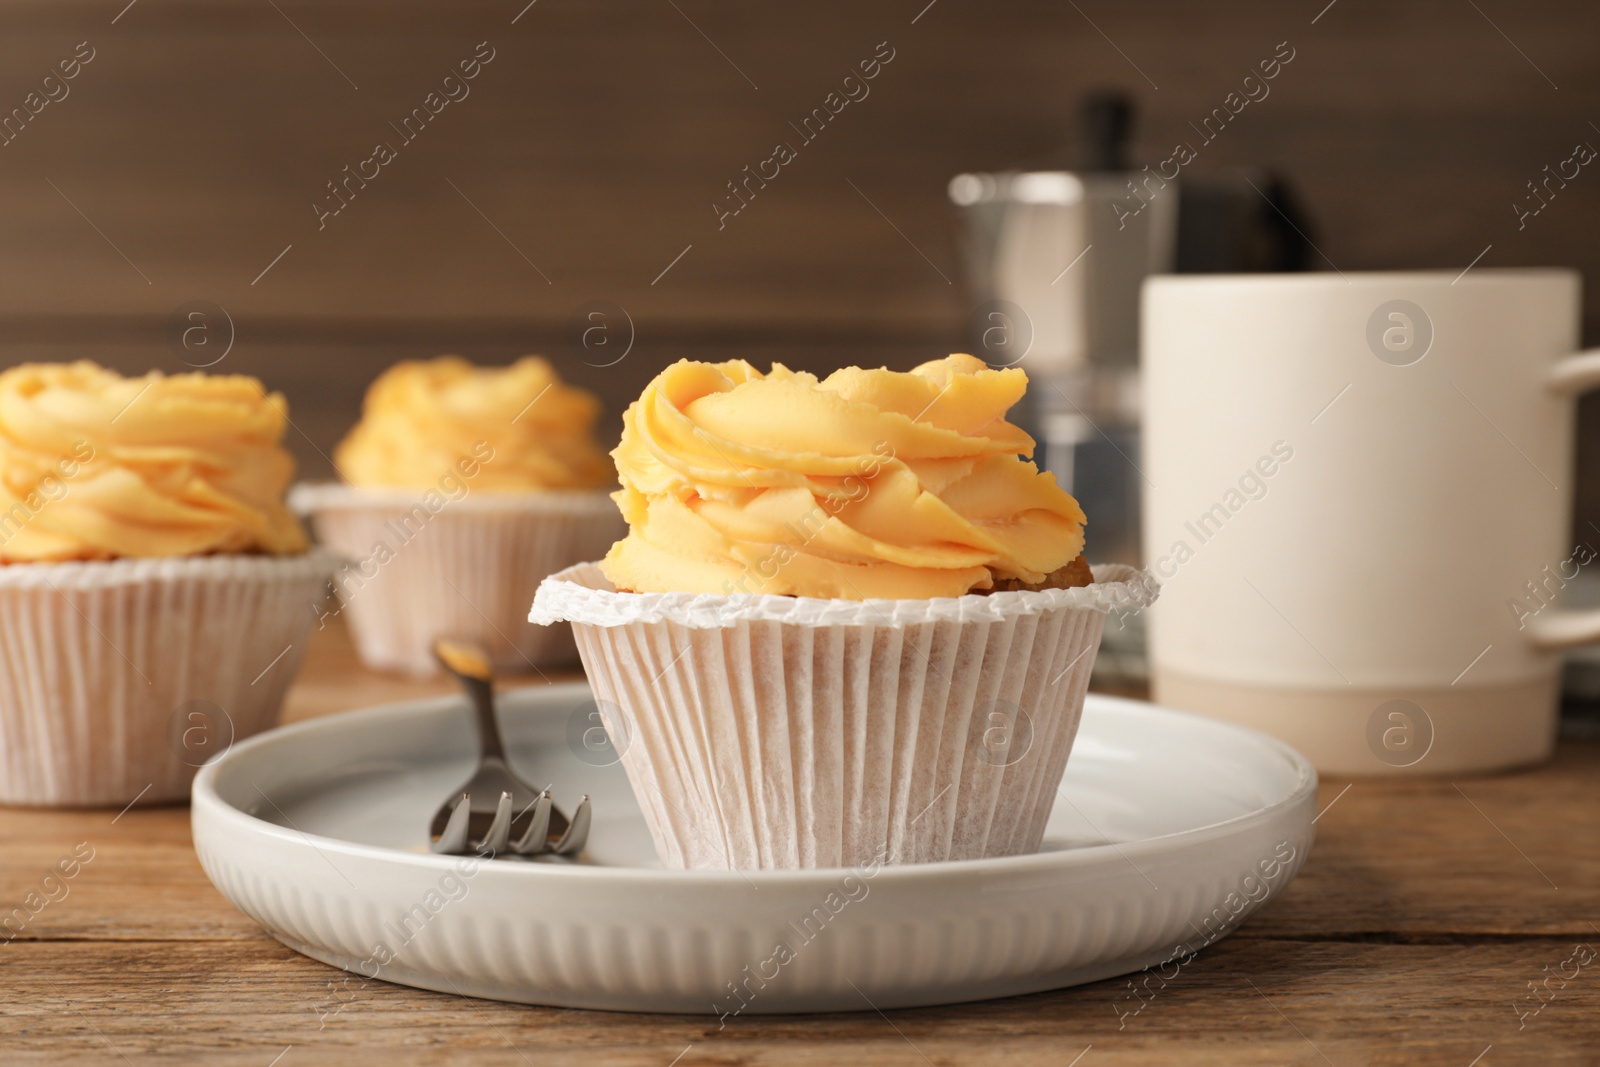 Photo of Tasty cupcakes with cream served on wooden table